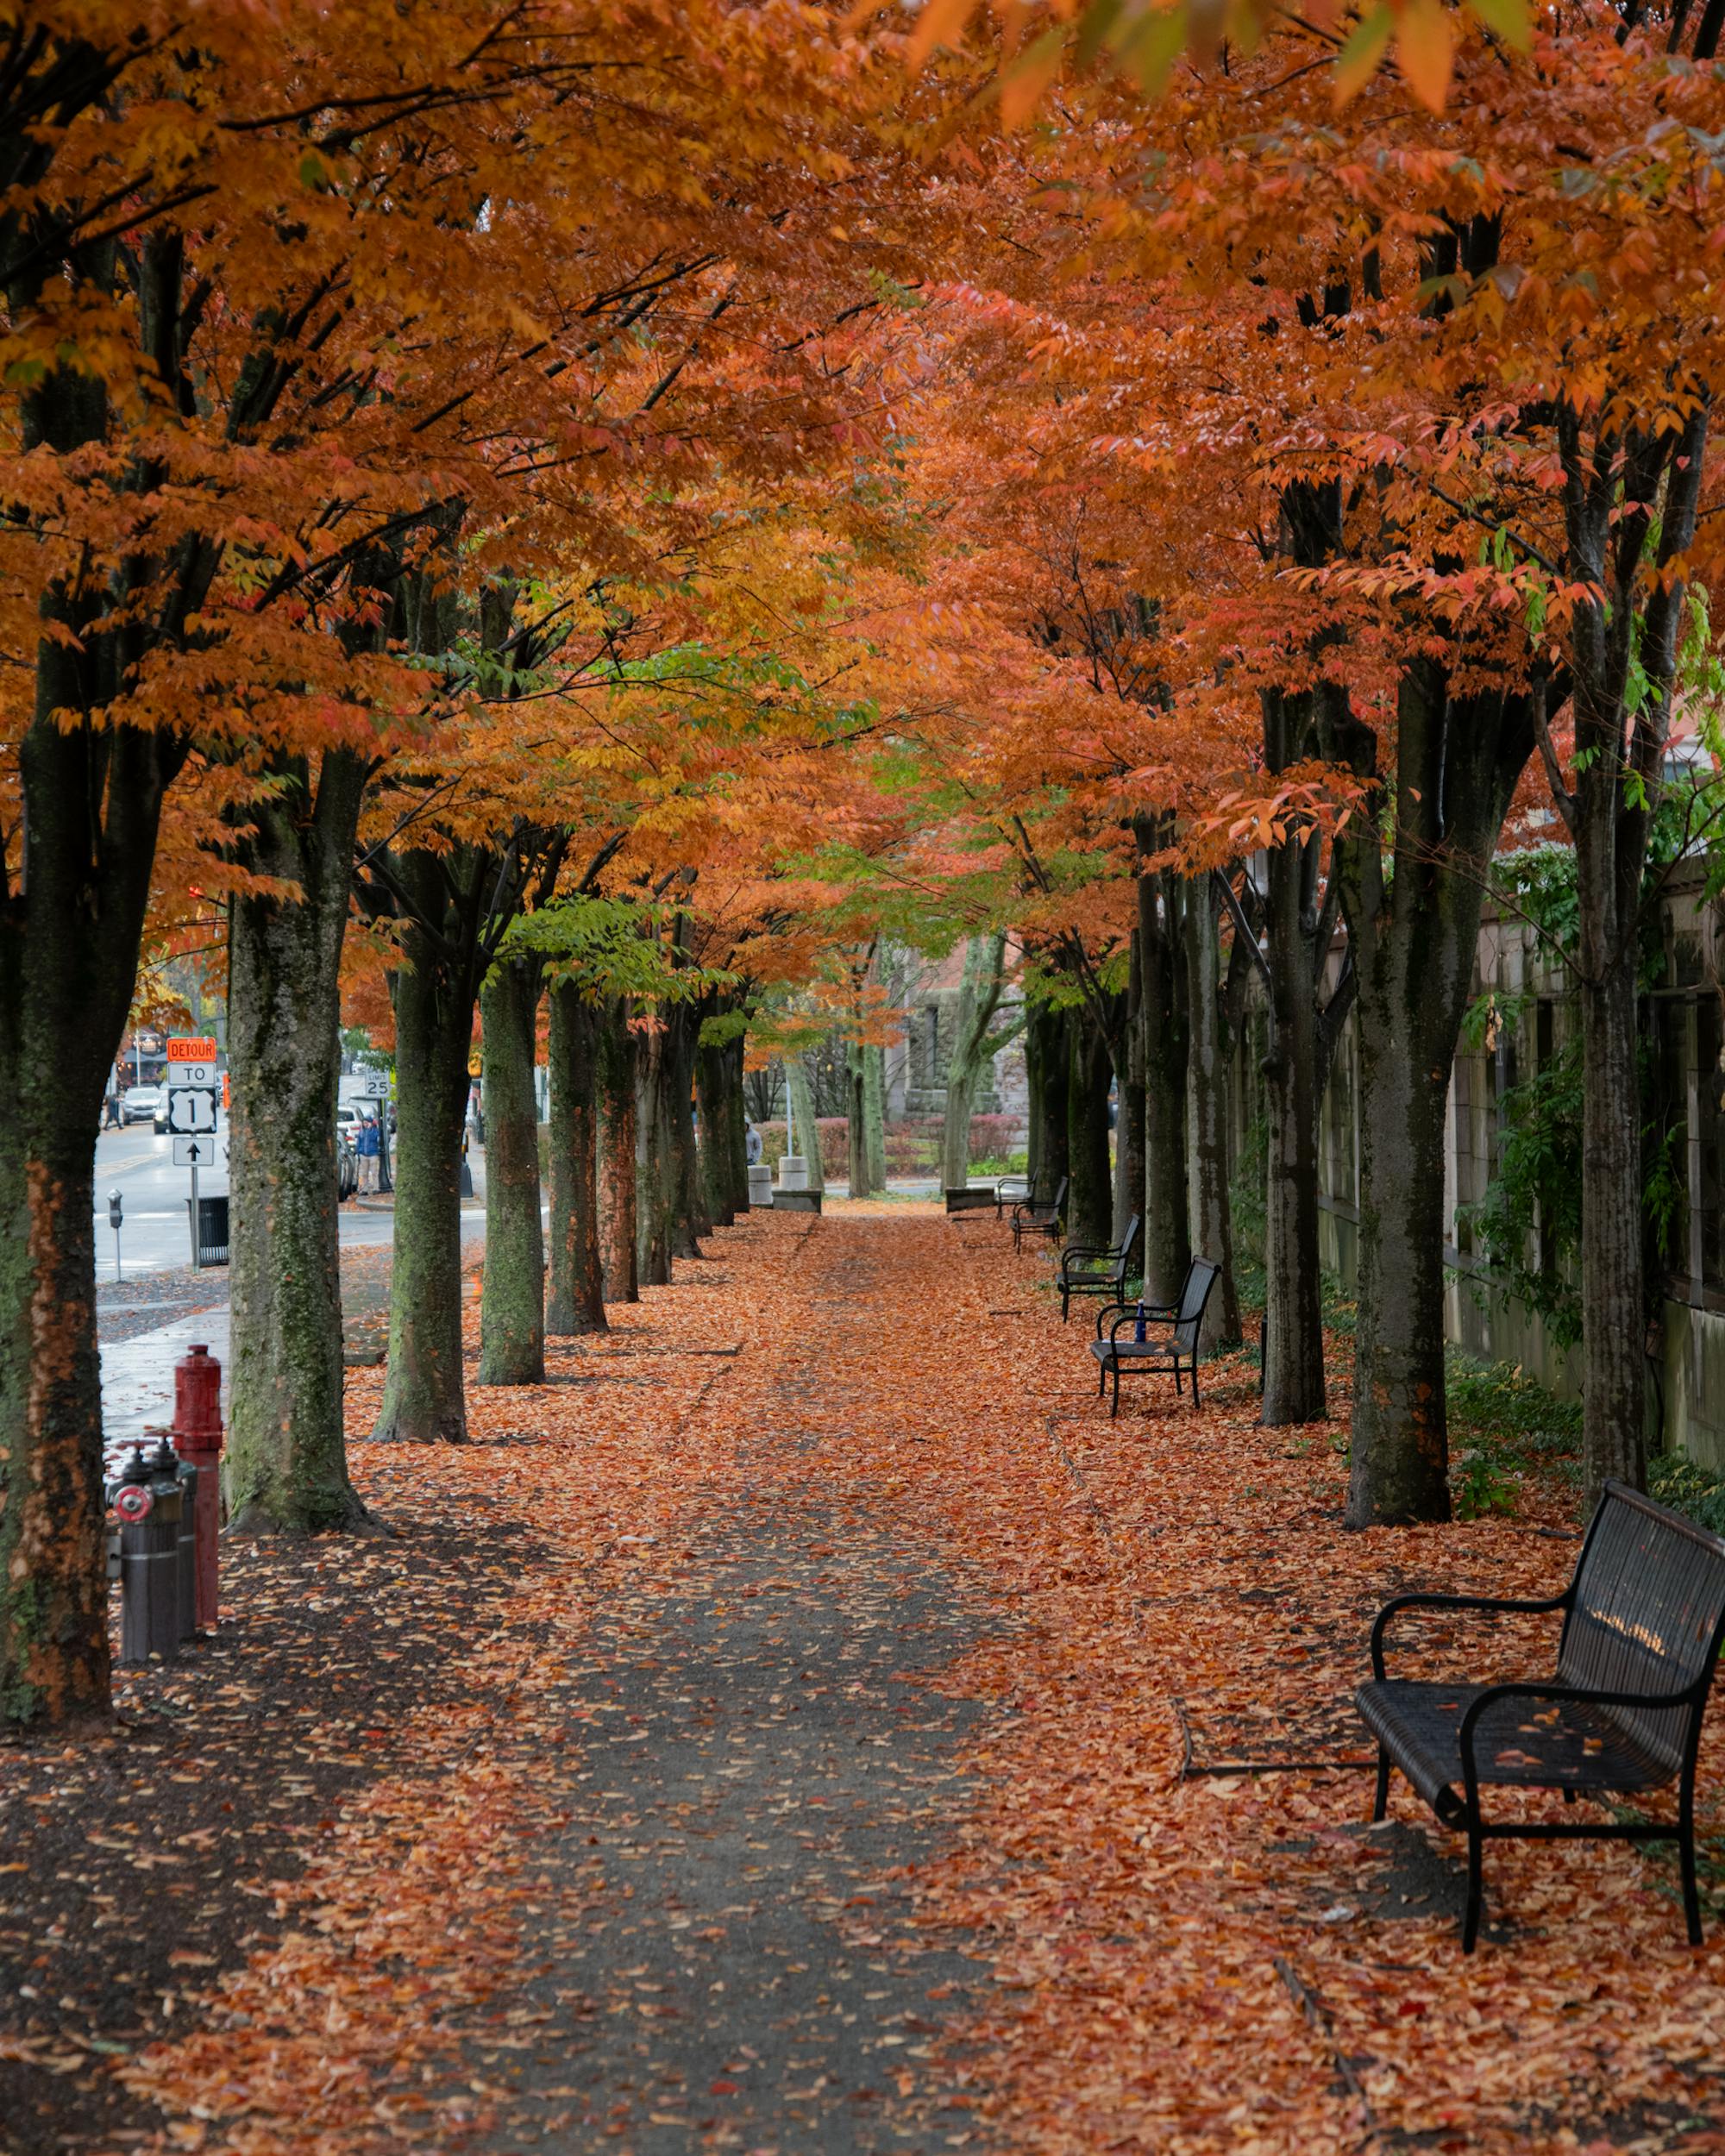 Trees with orange leaves line a sidewalk, which is covered in fallen orange leaves. 